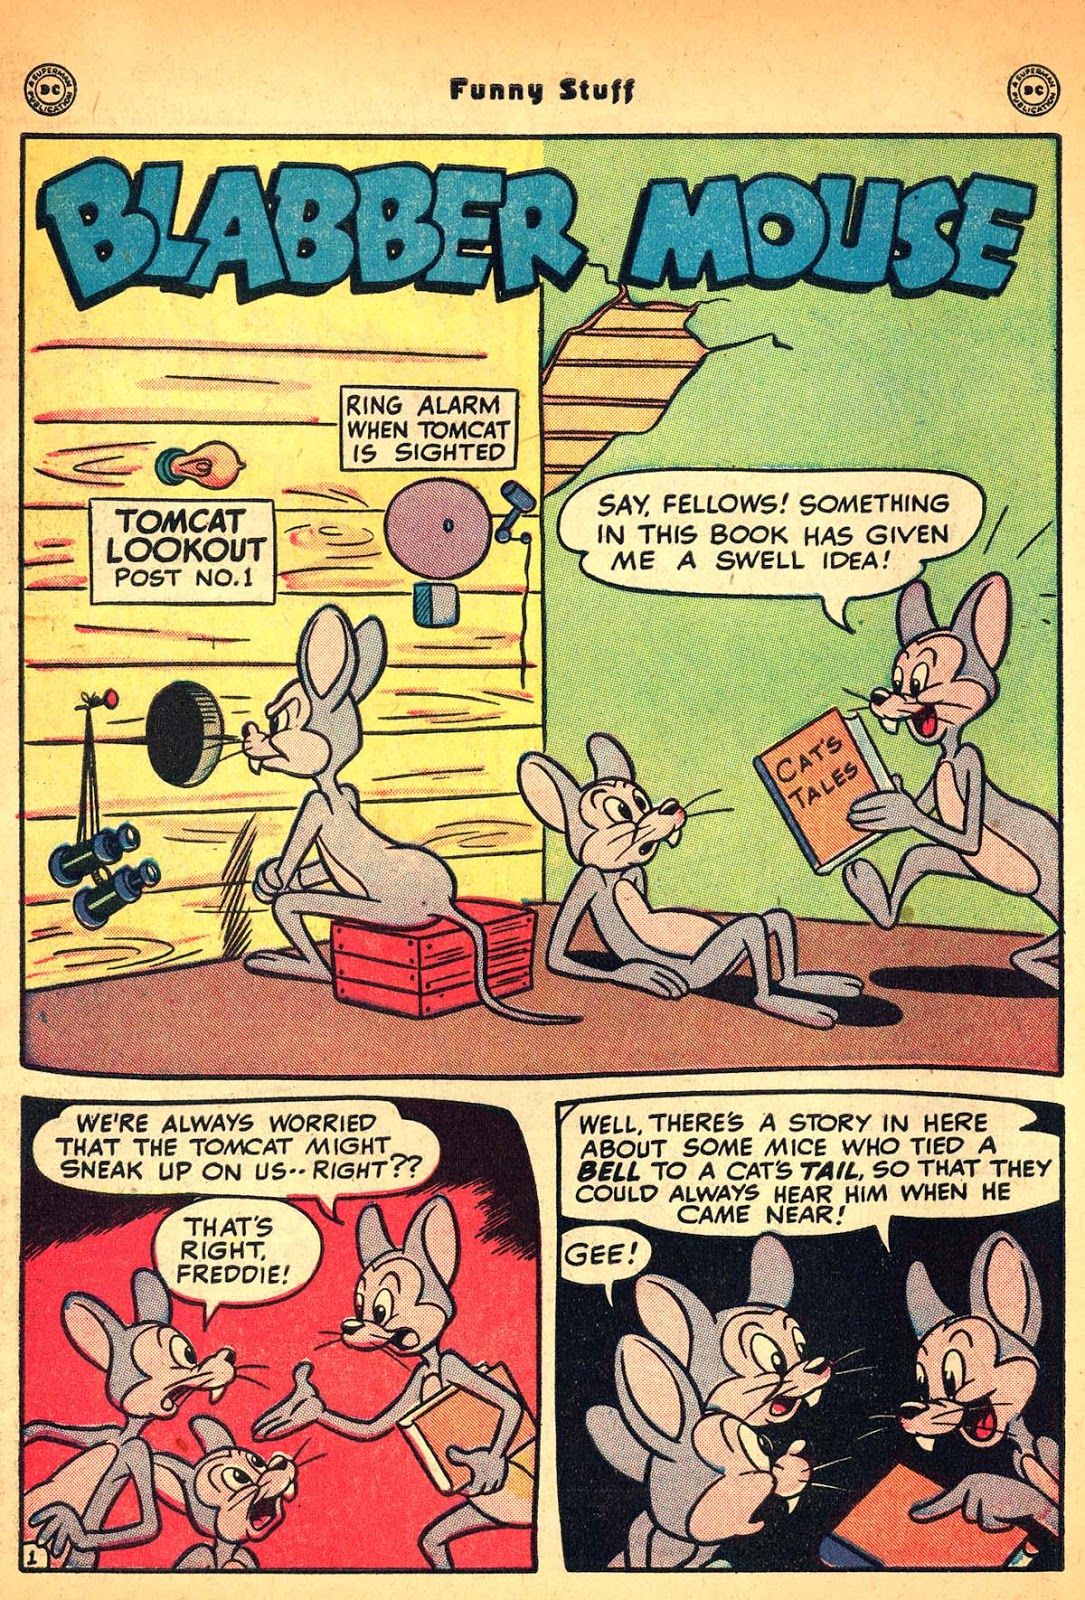 Saved From The Paper Drive: Comic Book Short Story~Blabber Mouse in